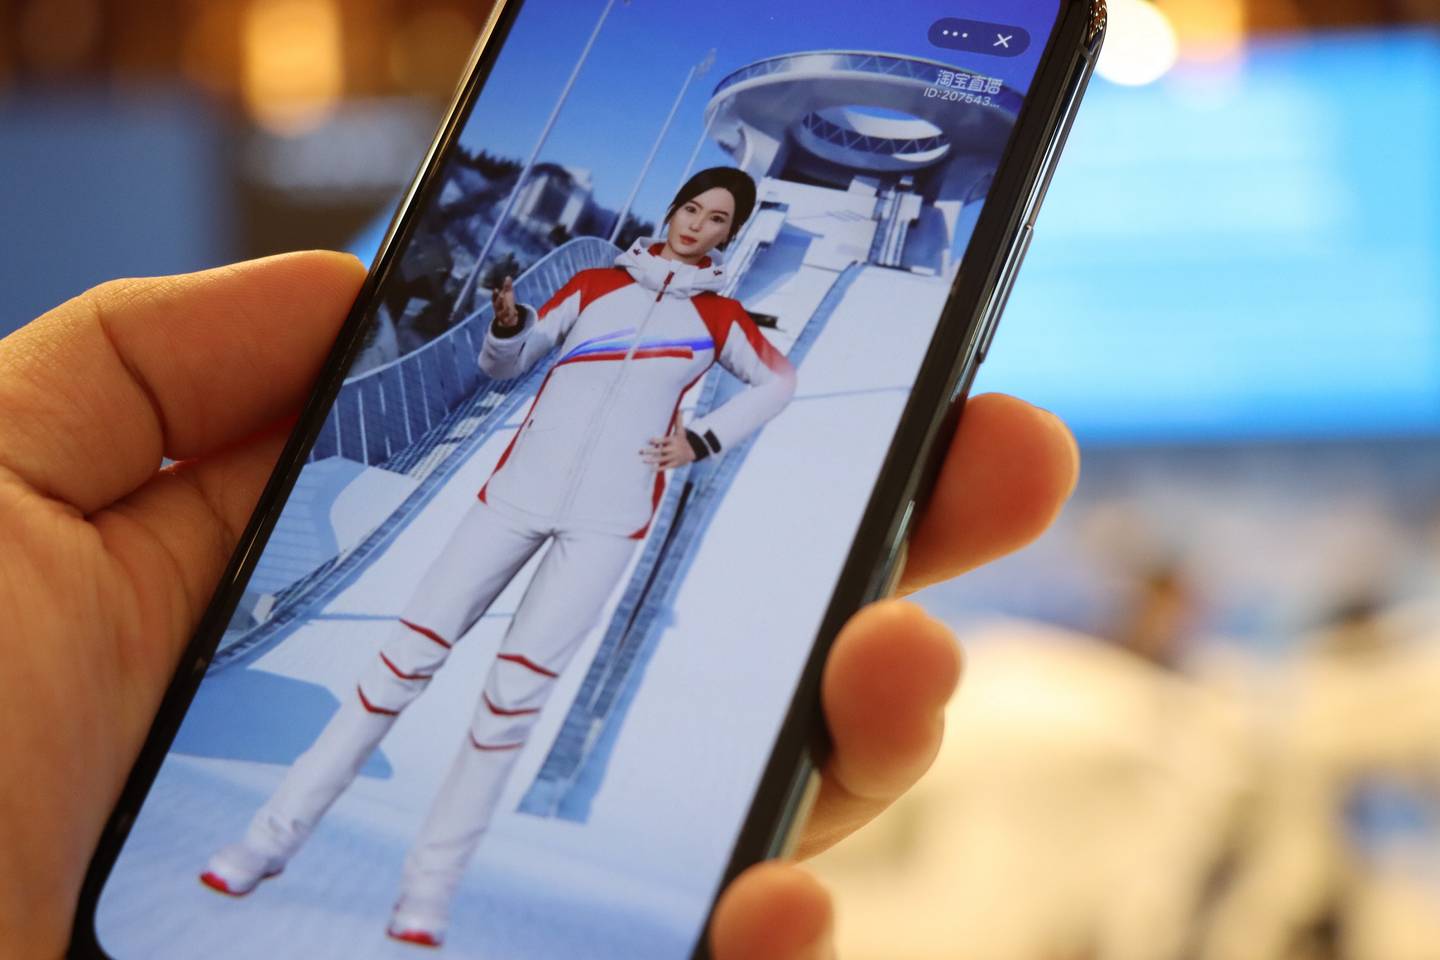 Alibaba unveiled virtual influencer Dong Dong to coincide with the Beijing Winter Olympic Games.